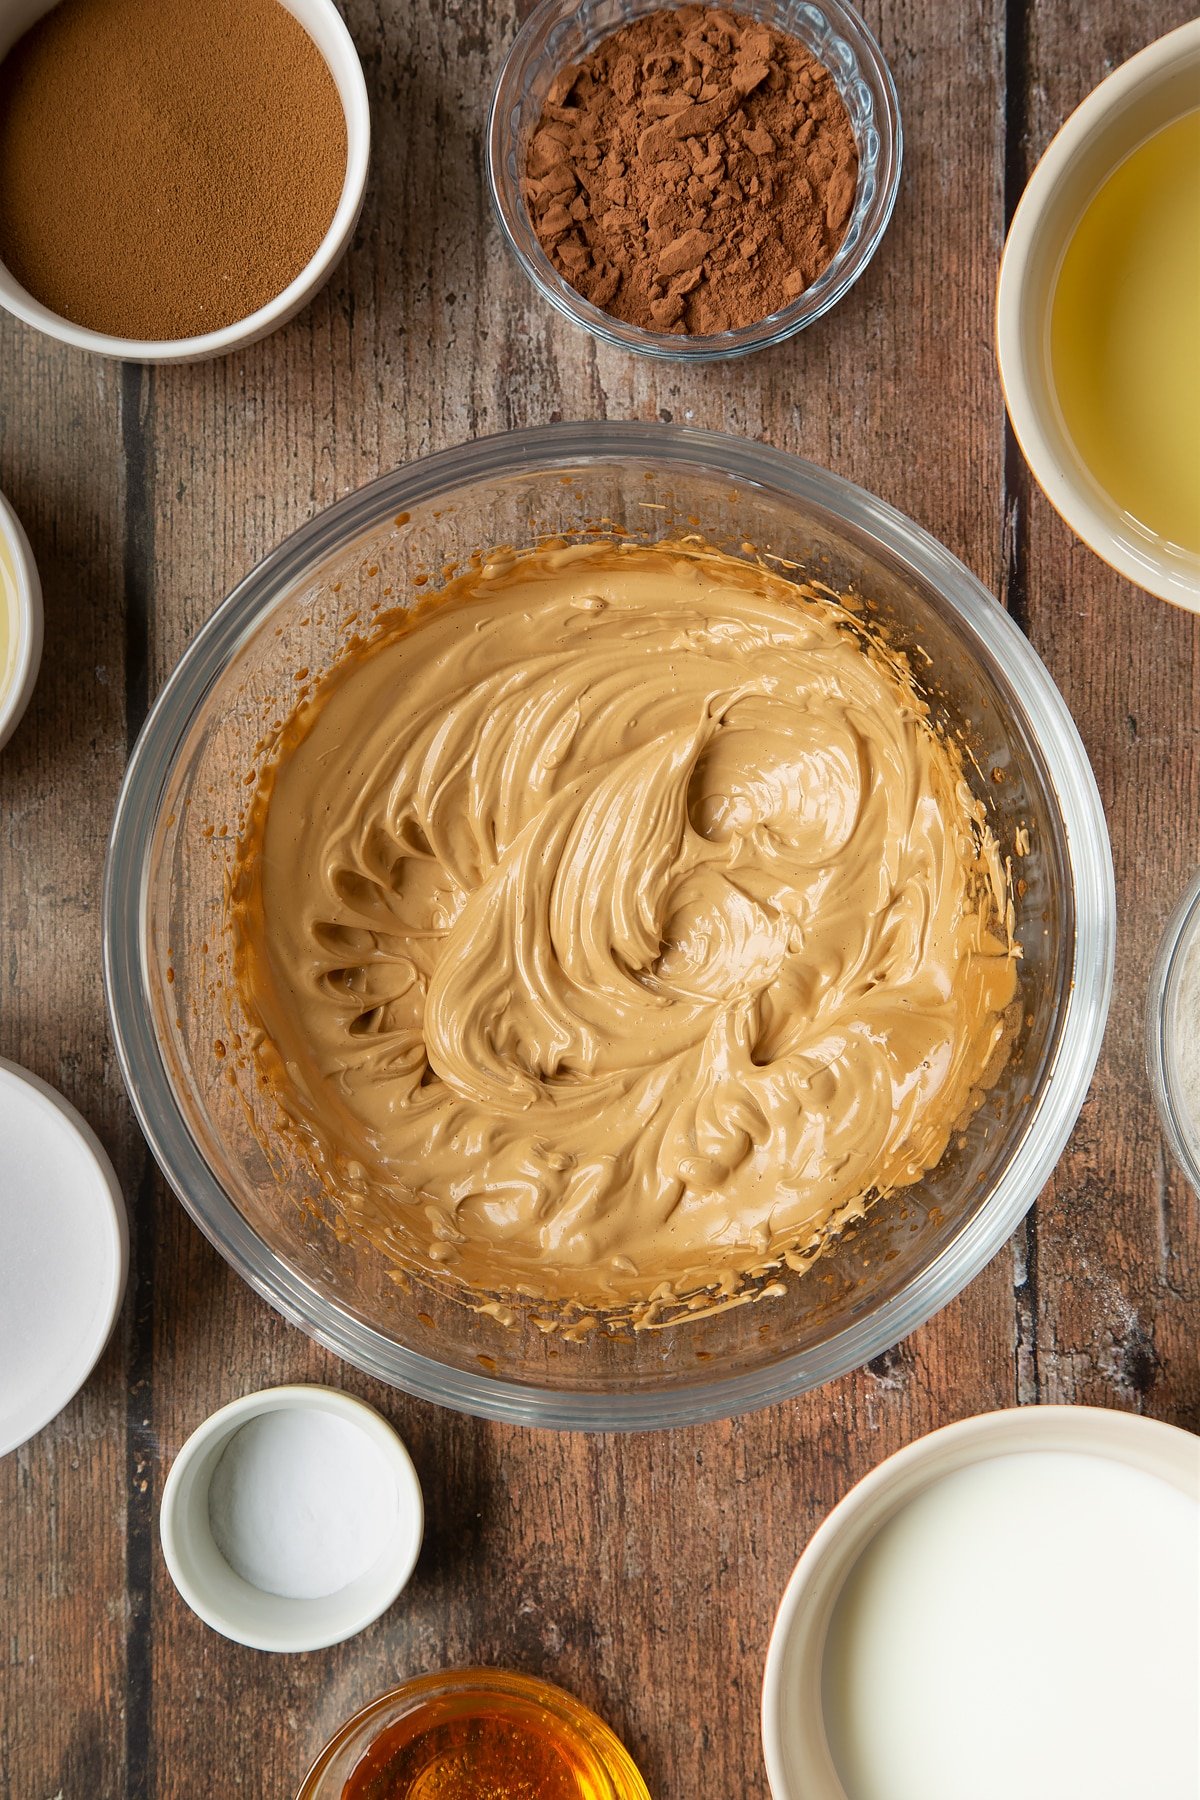 Sugar, instant coffee and hot water whisked together in a glass mixing bowl to create pale, creamy peaks. Surrounding the bowl is ingredients to make dalgona coffee cake.